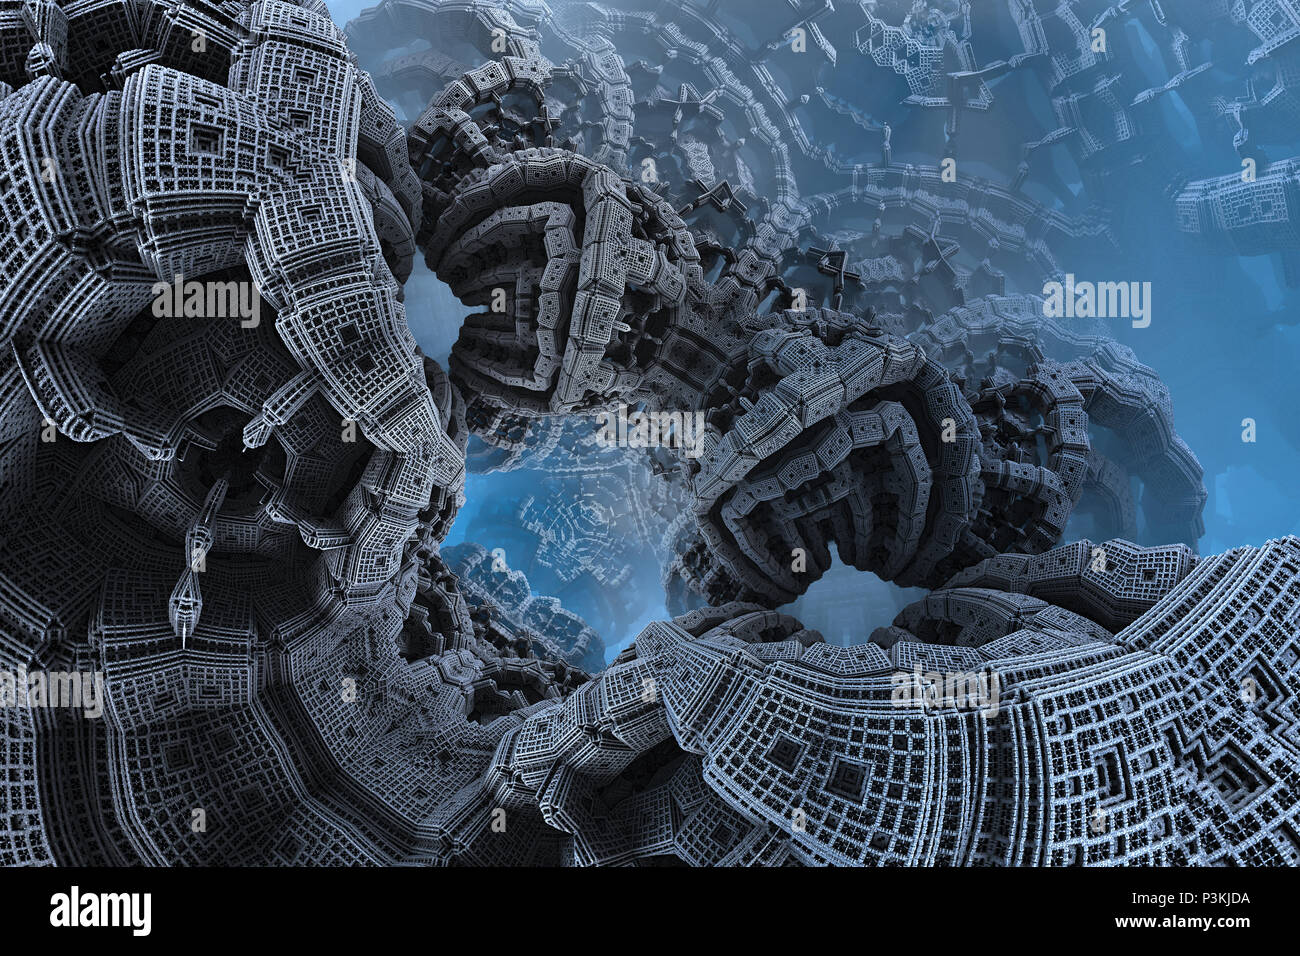 Epic abstract poster or background with fractals. Bigscale Image. Stock Photo